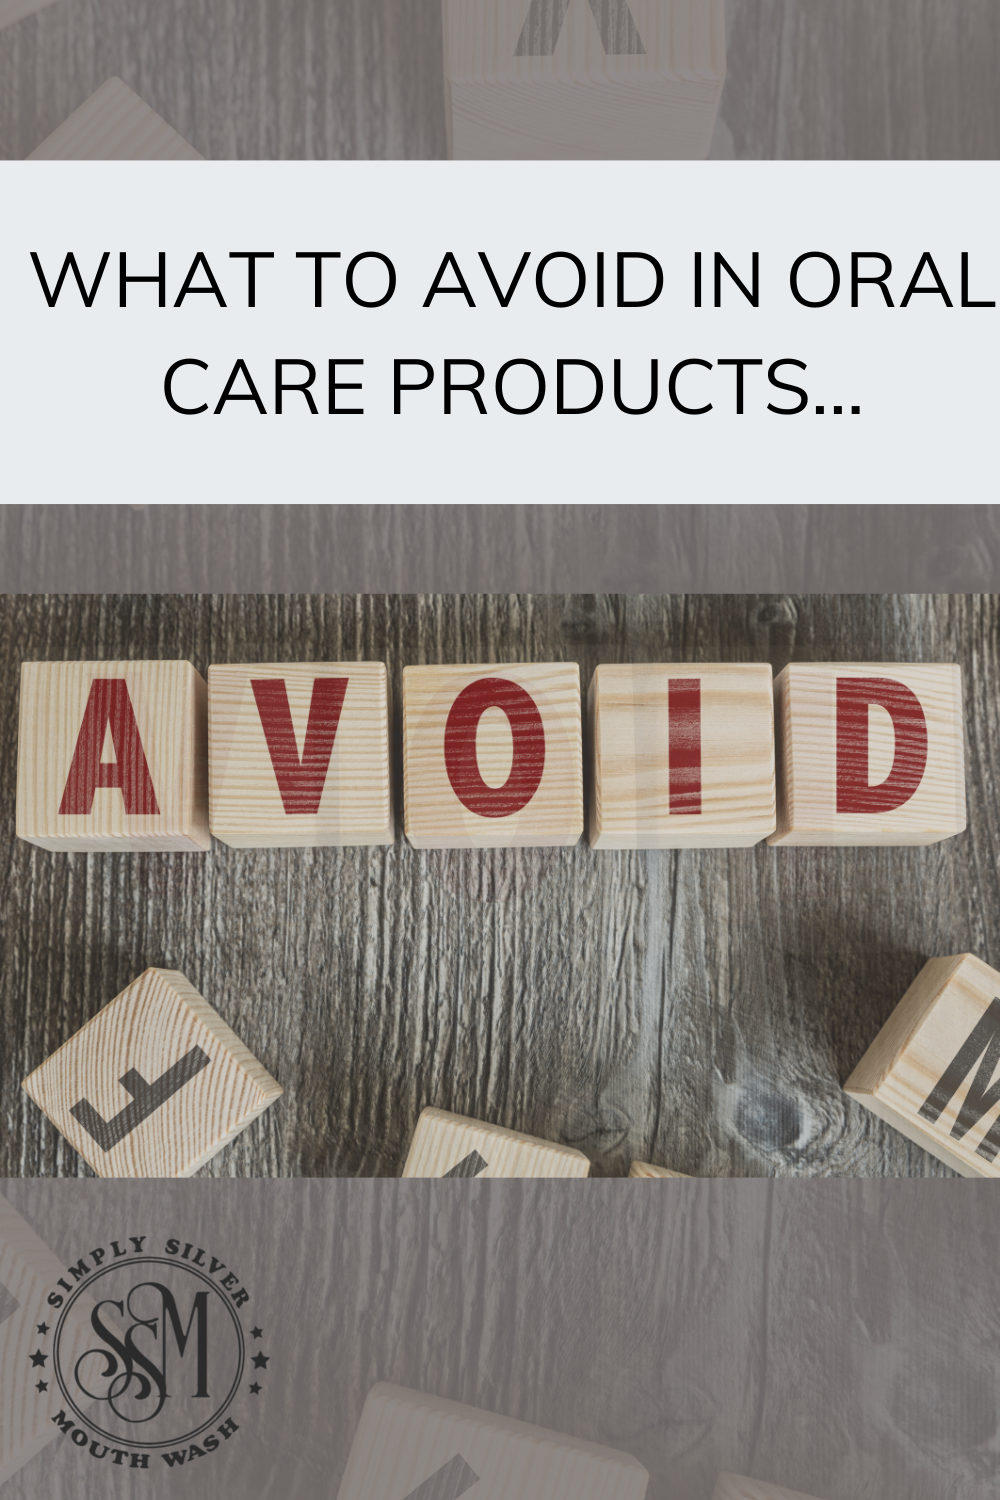 What to avoid in oral care products